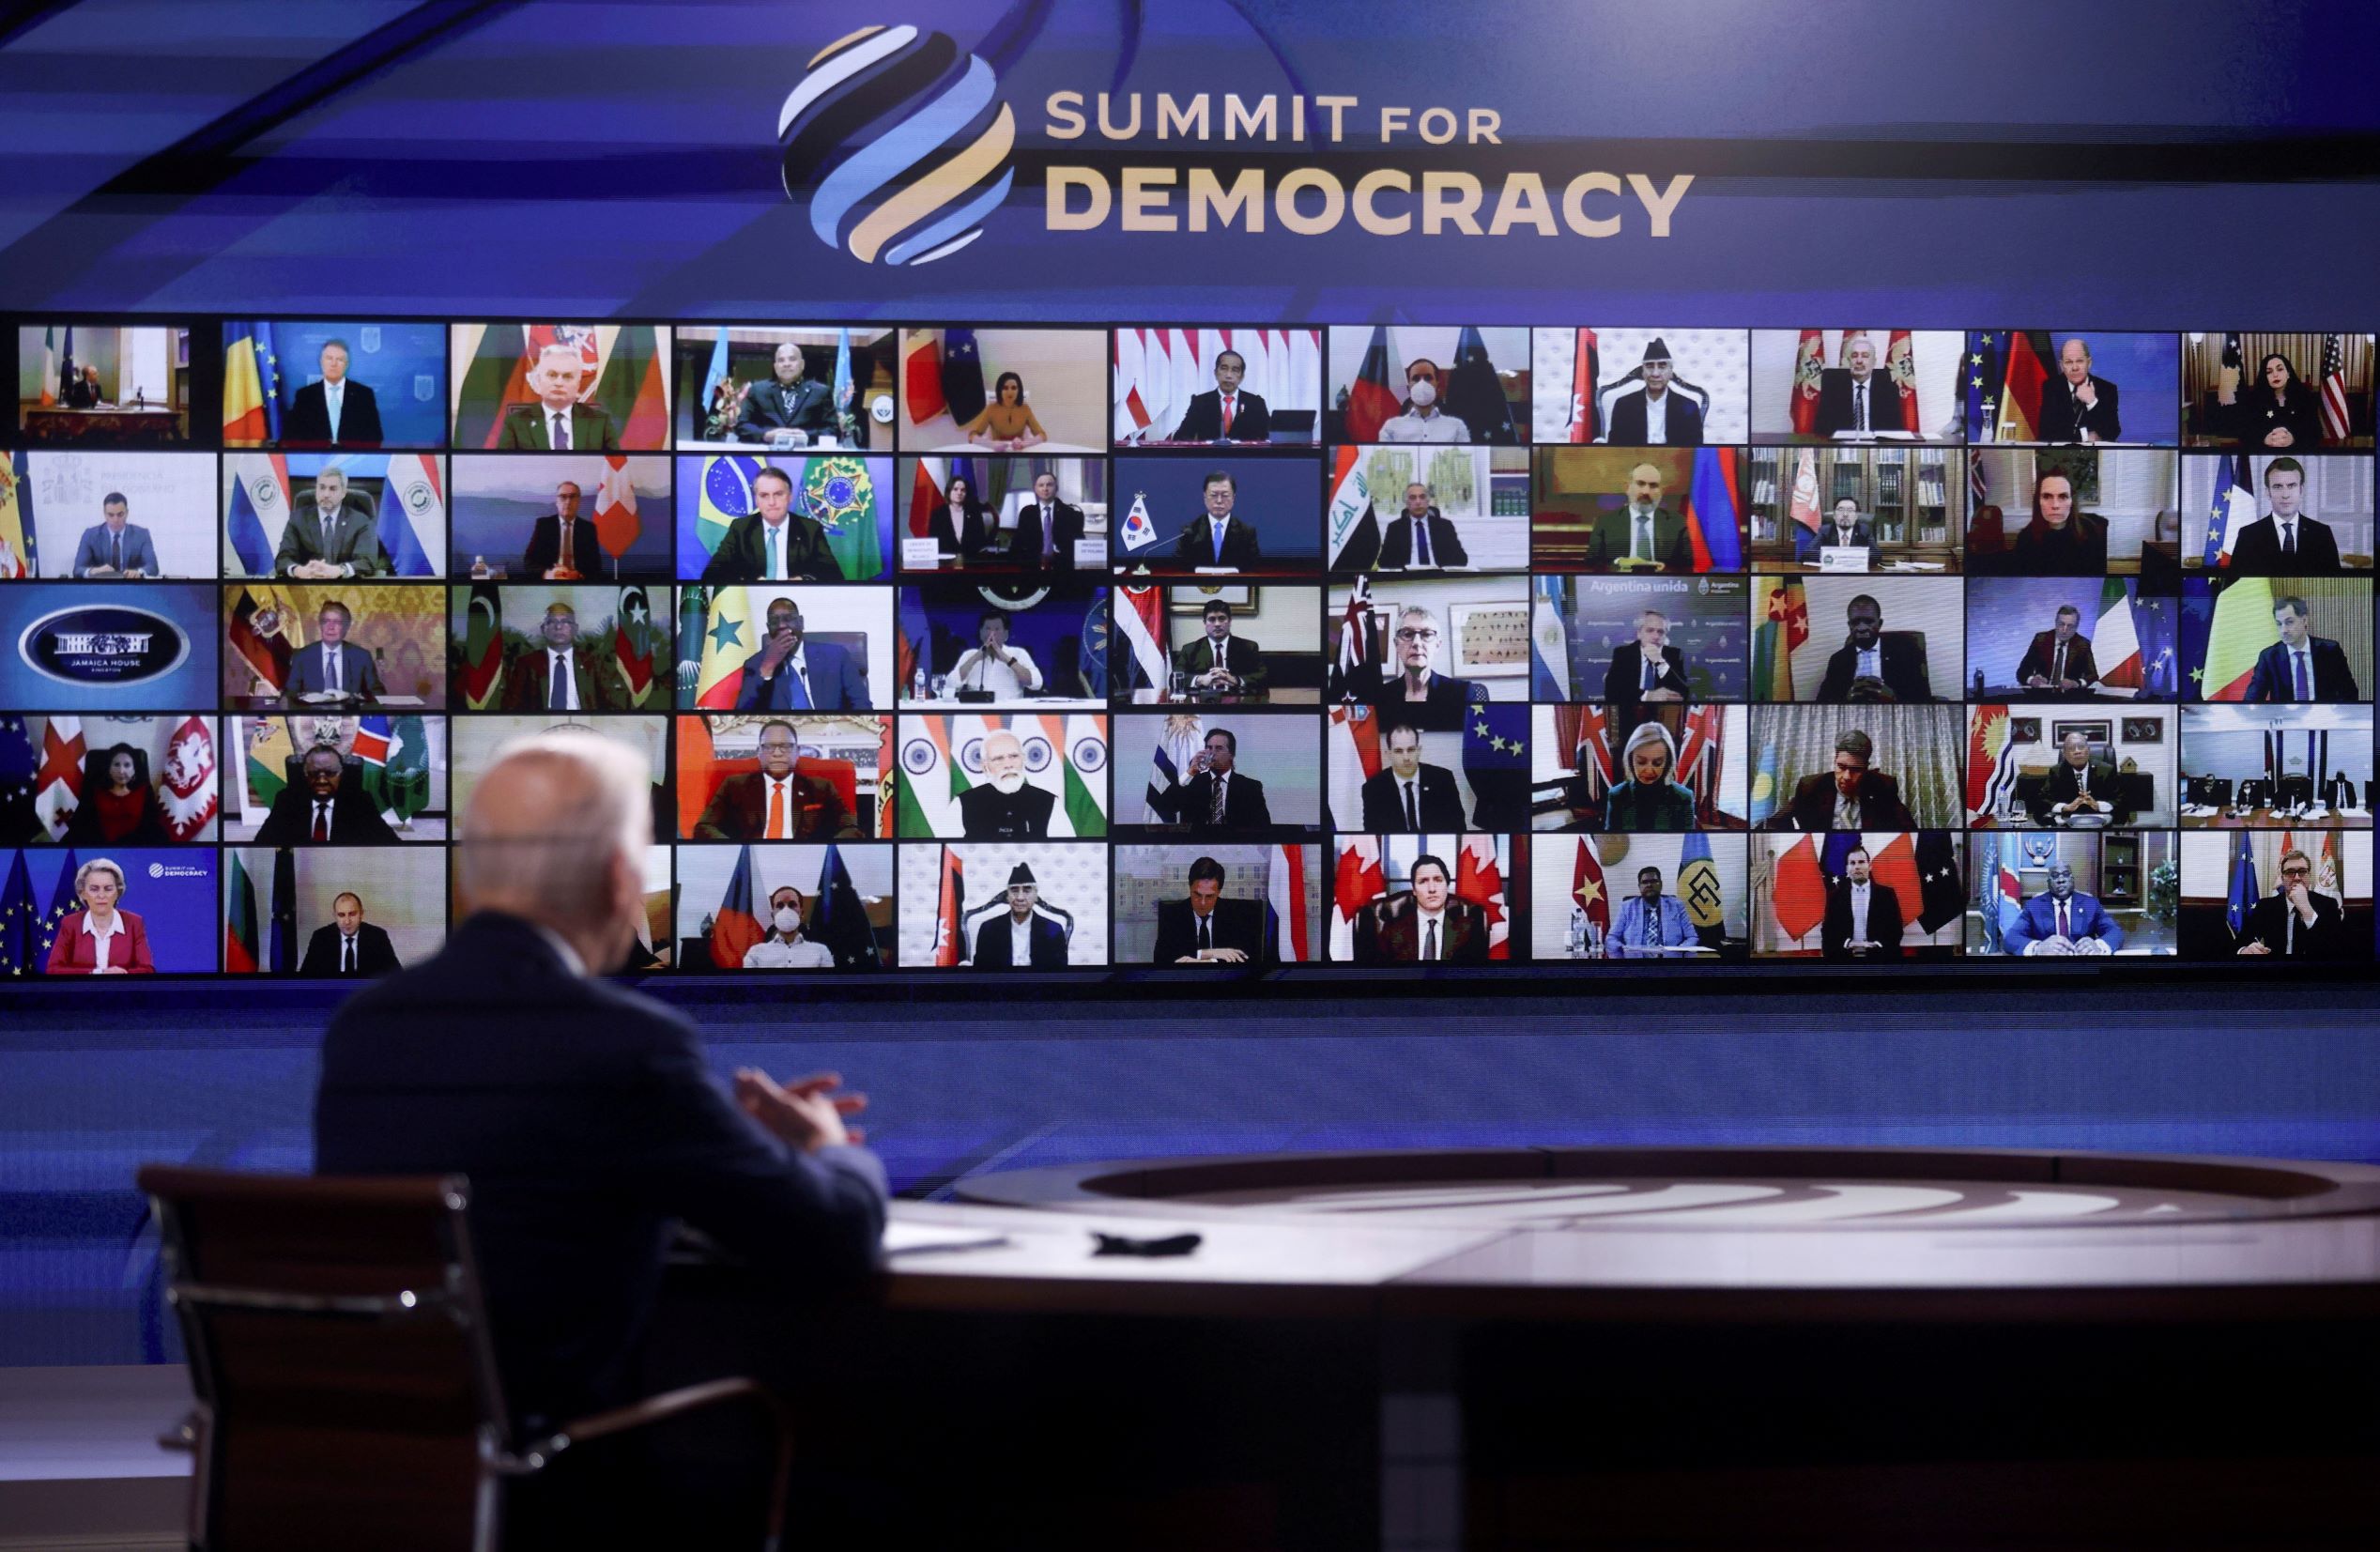 U.S. President Joe Biden convenes a virtual summit with leaders from democratic nations at Summit for Democracy in Washington, DC, on December 9, 2021. REUTERS/Leah Millis